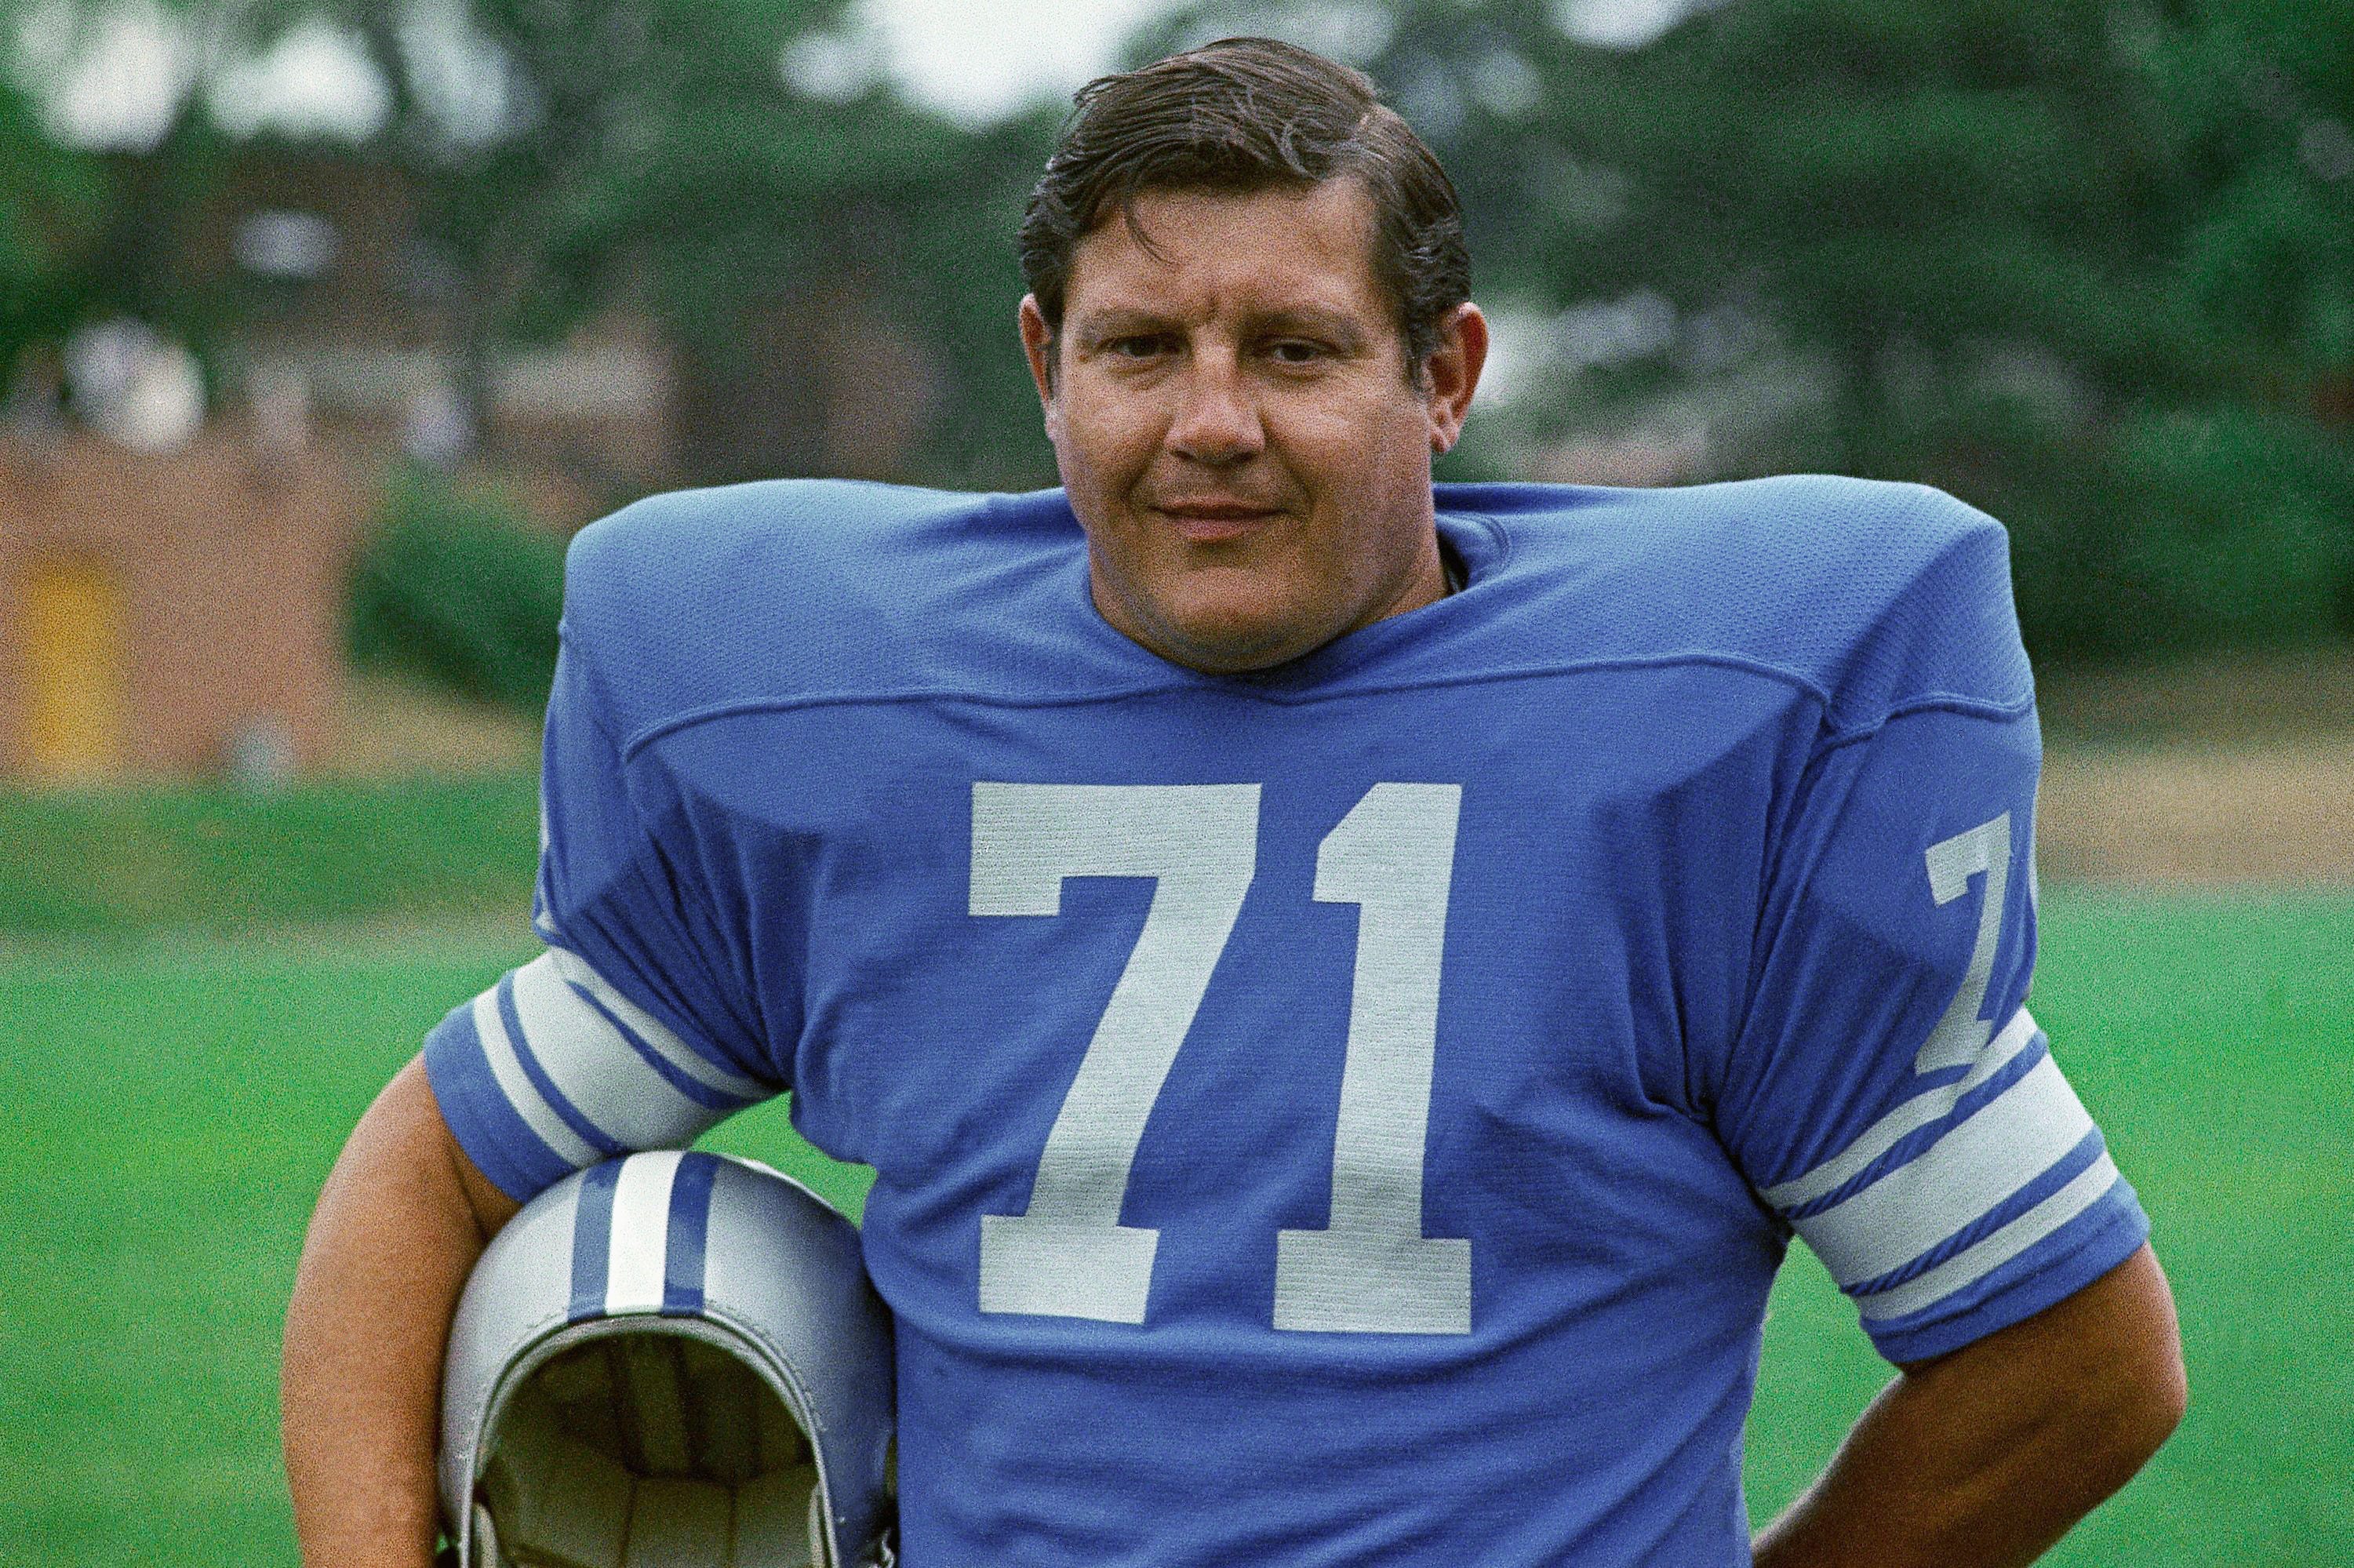 Alex Karras, here in 1971, will join Herman Moore and Roger Brown in the Pride of the Lions display, which honors the franchise all-time great players.